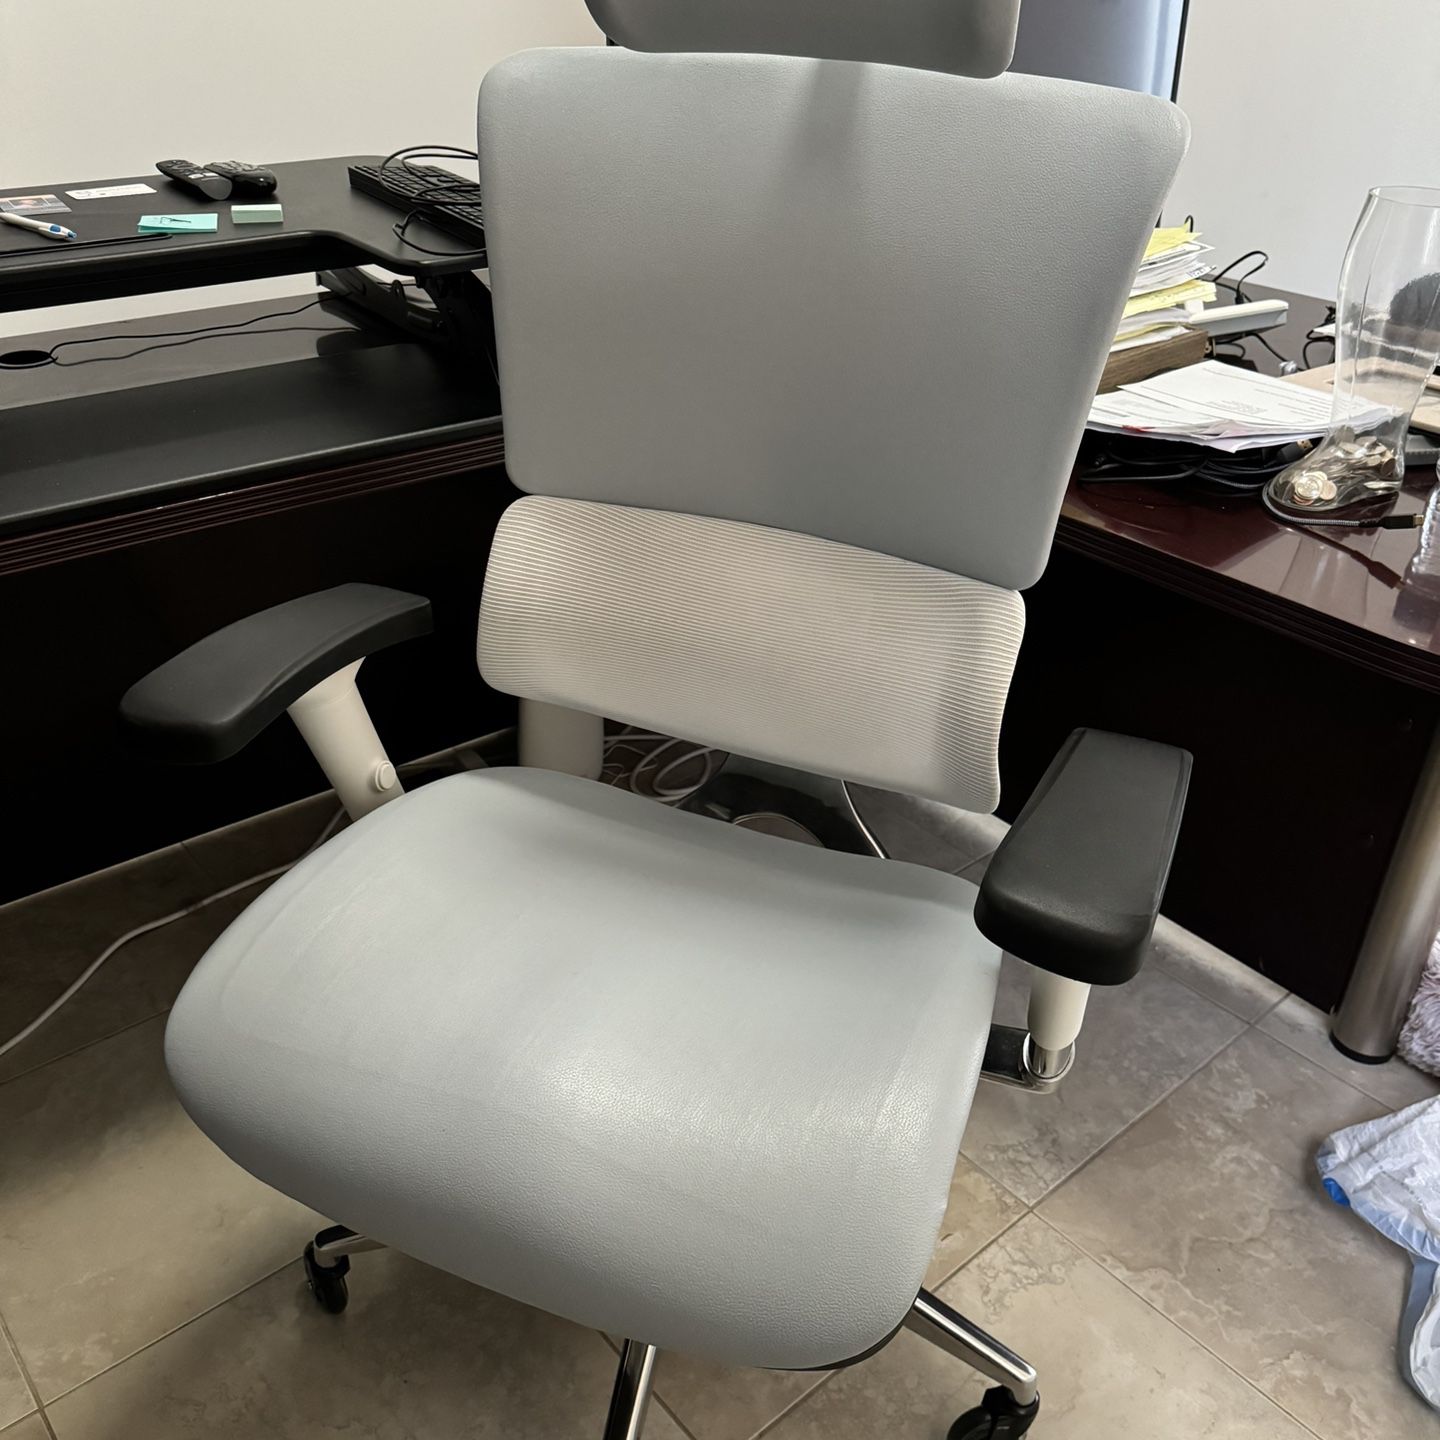 X Chair X Tech Ultimate Executive Chair - Stone - Excellent Condition